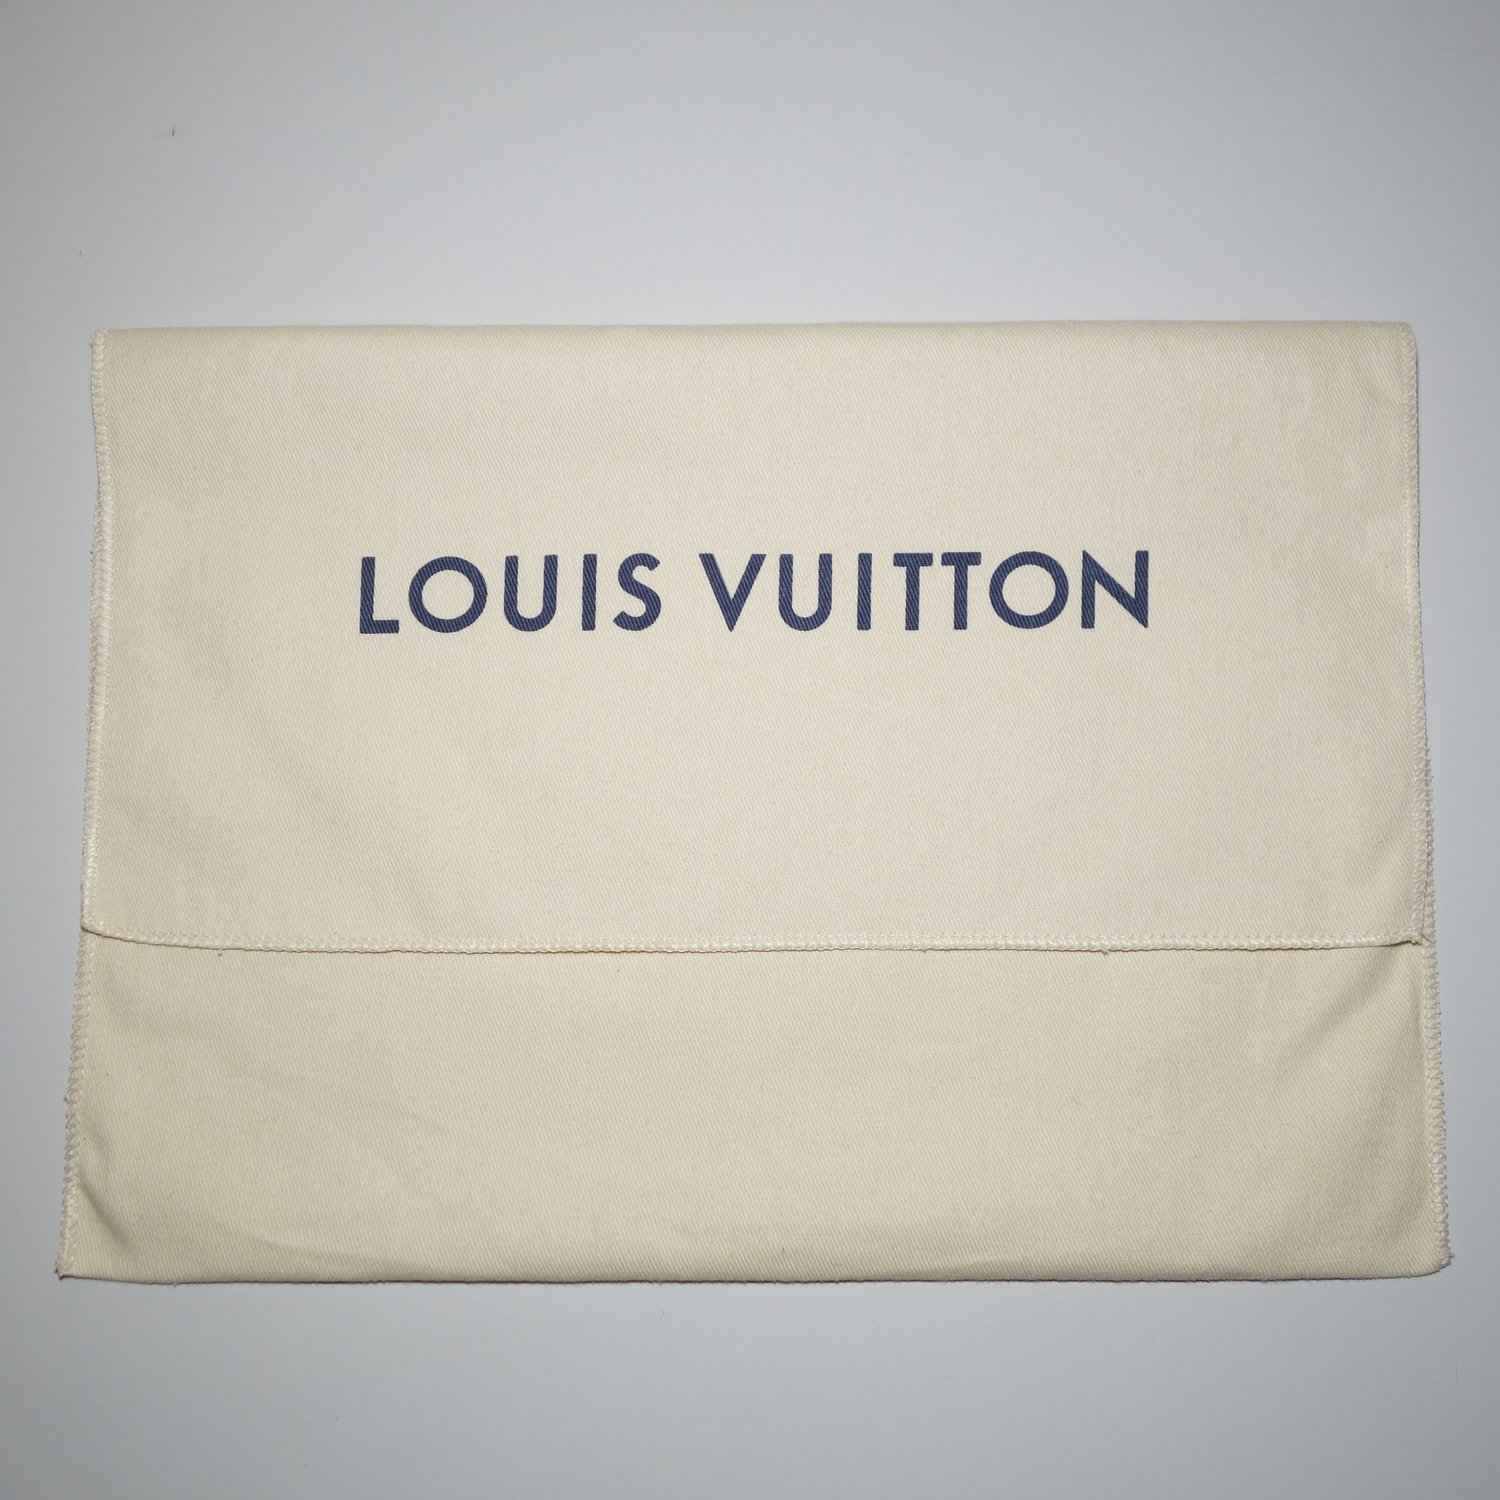 Authentic Louis Vuitton dust bag 9 inches Wide x 15 inches